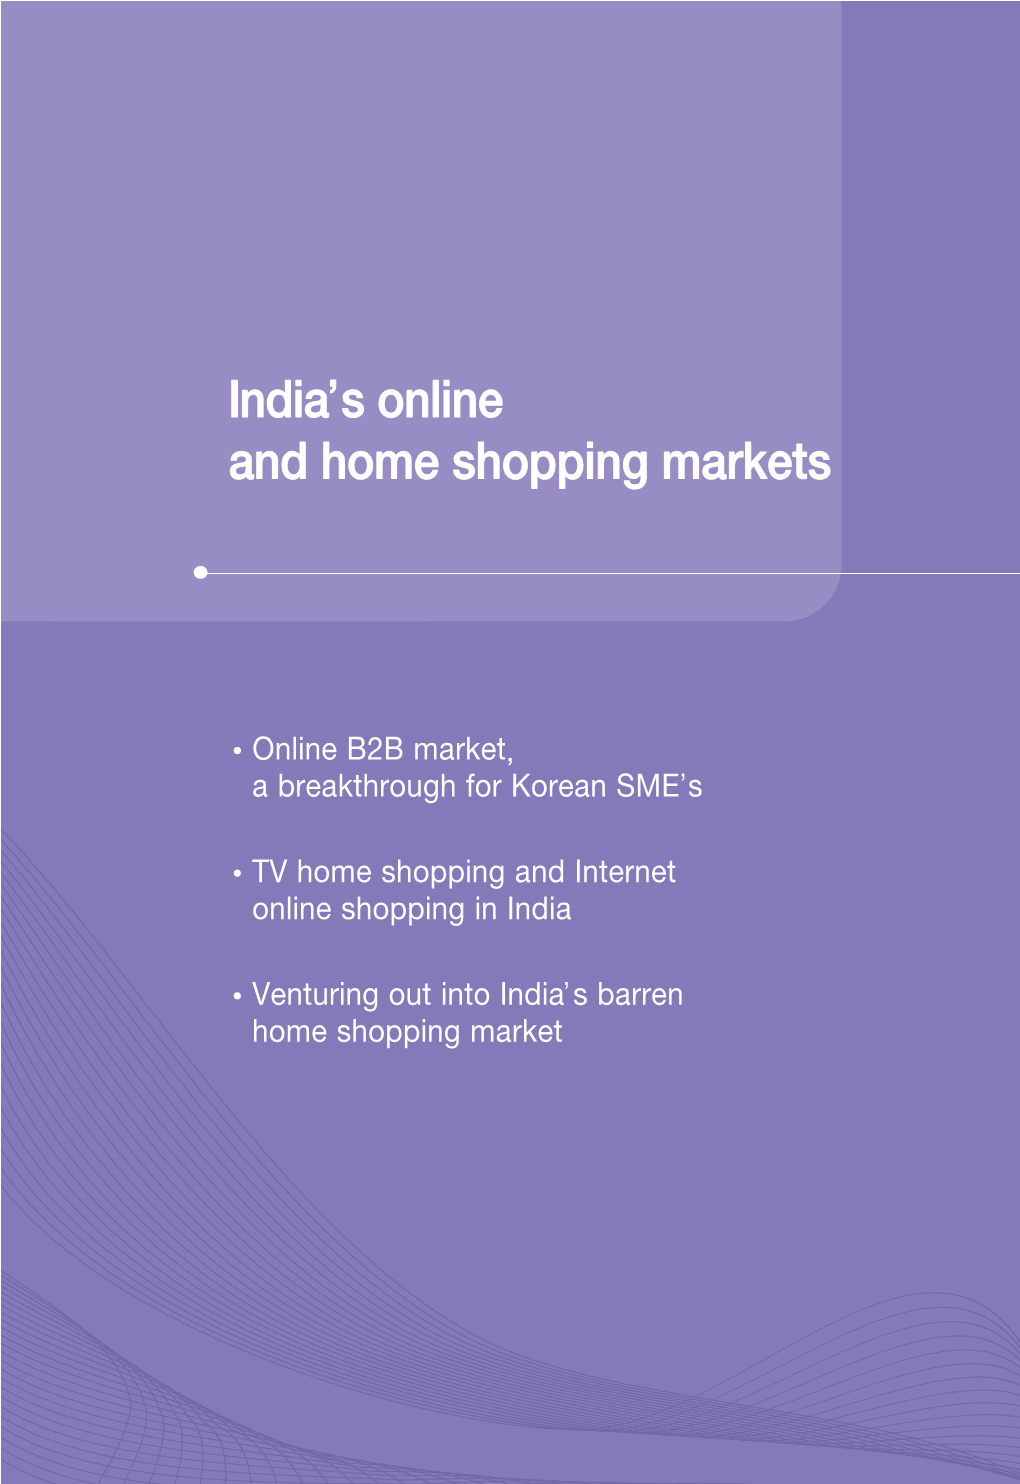 India's Online and Home Shopping Markets